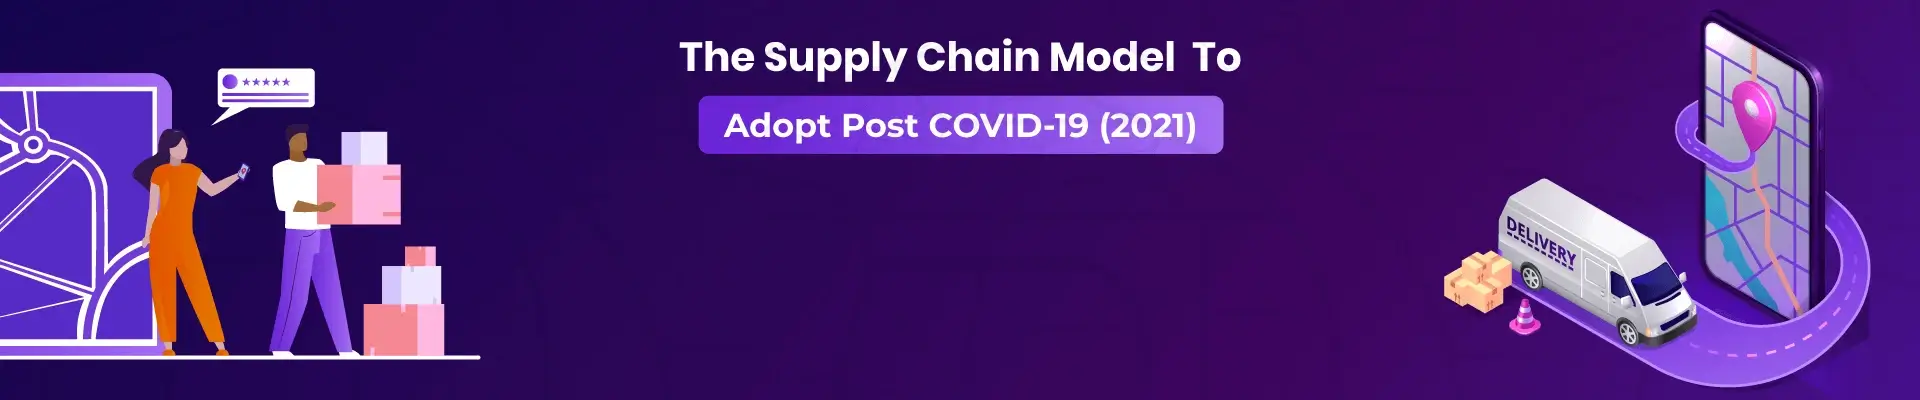 The Supply Chain Model To Adopt Post COVID-19